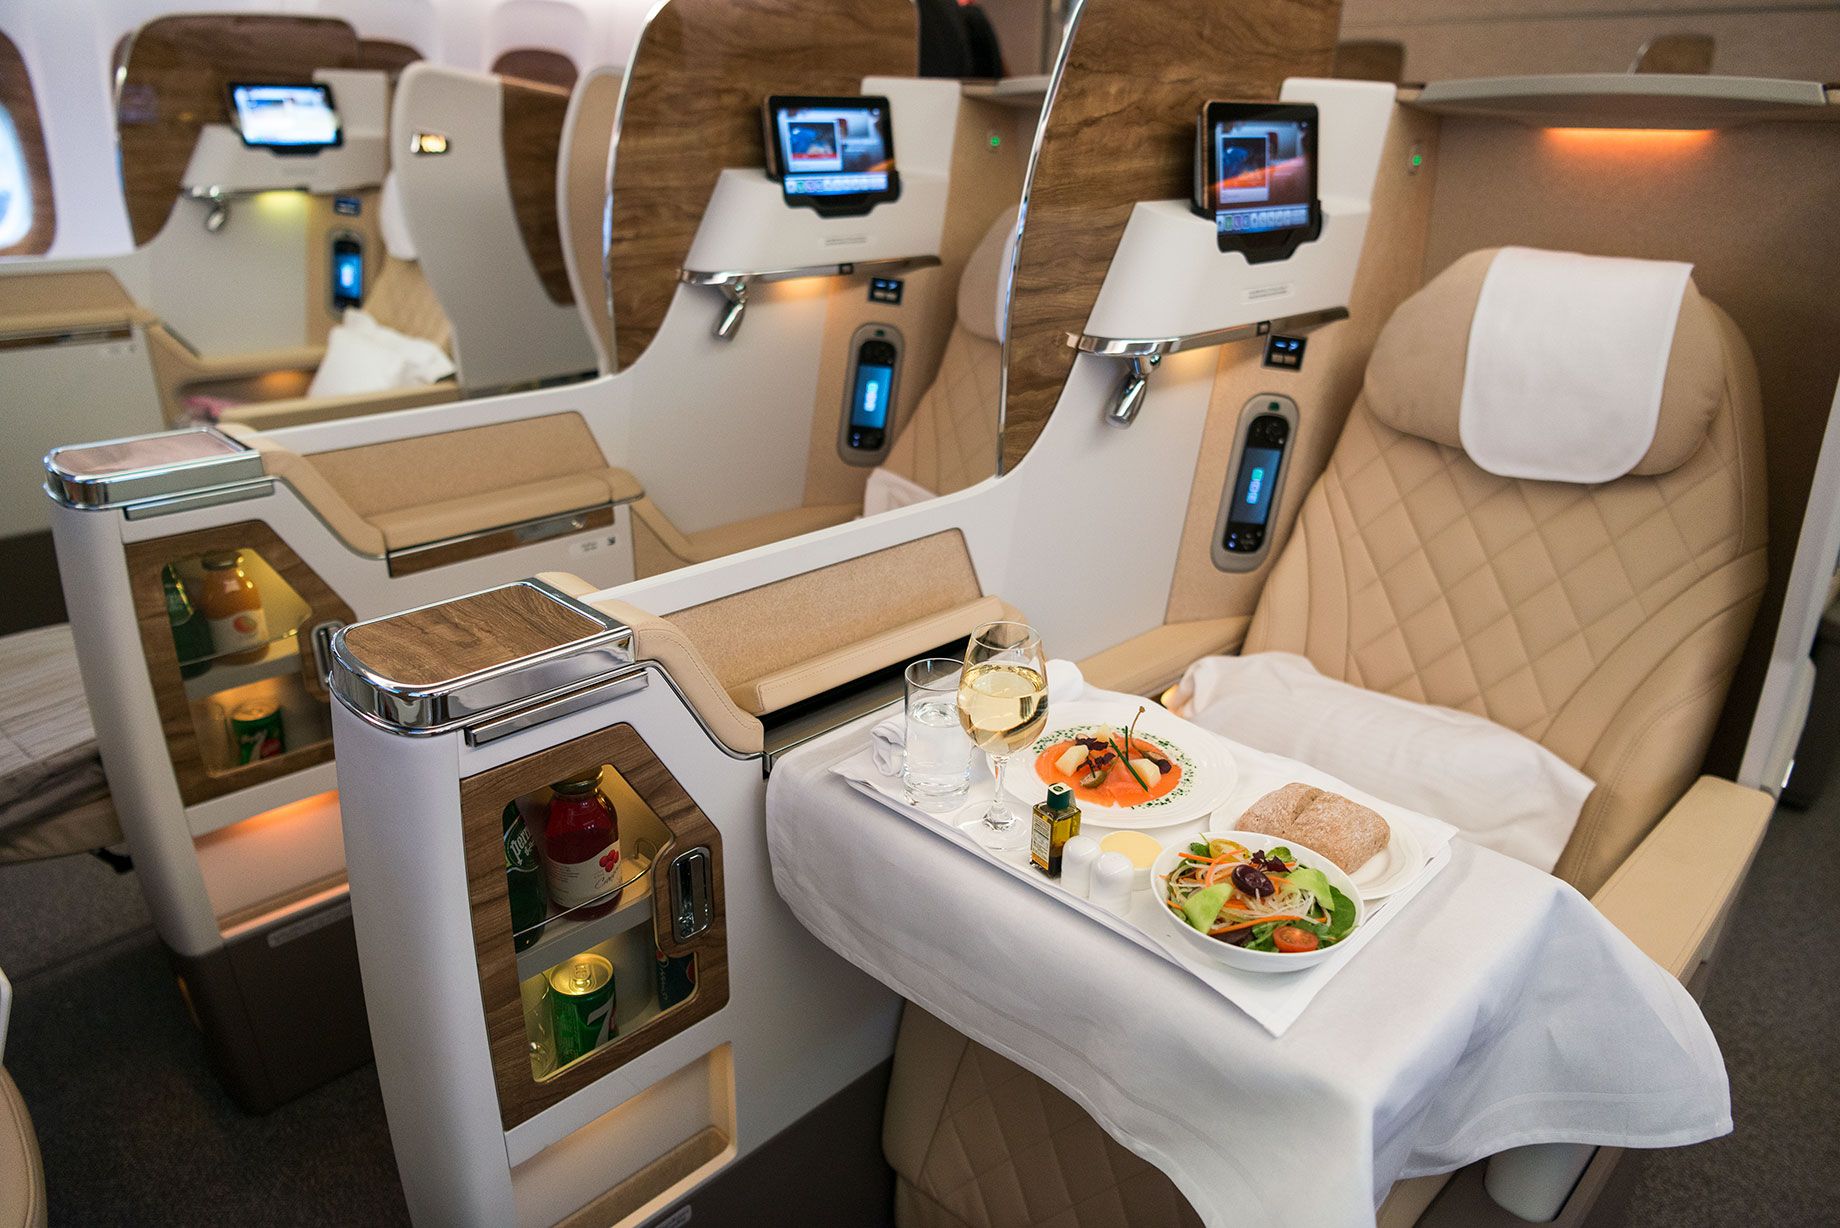 Emirates' Boeing 777 business class cabin.